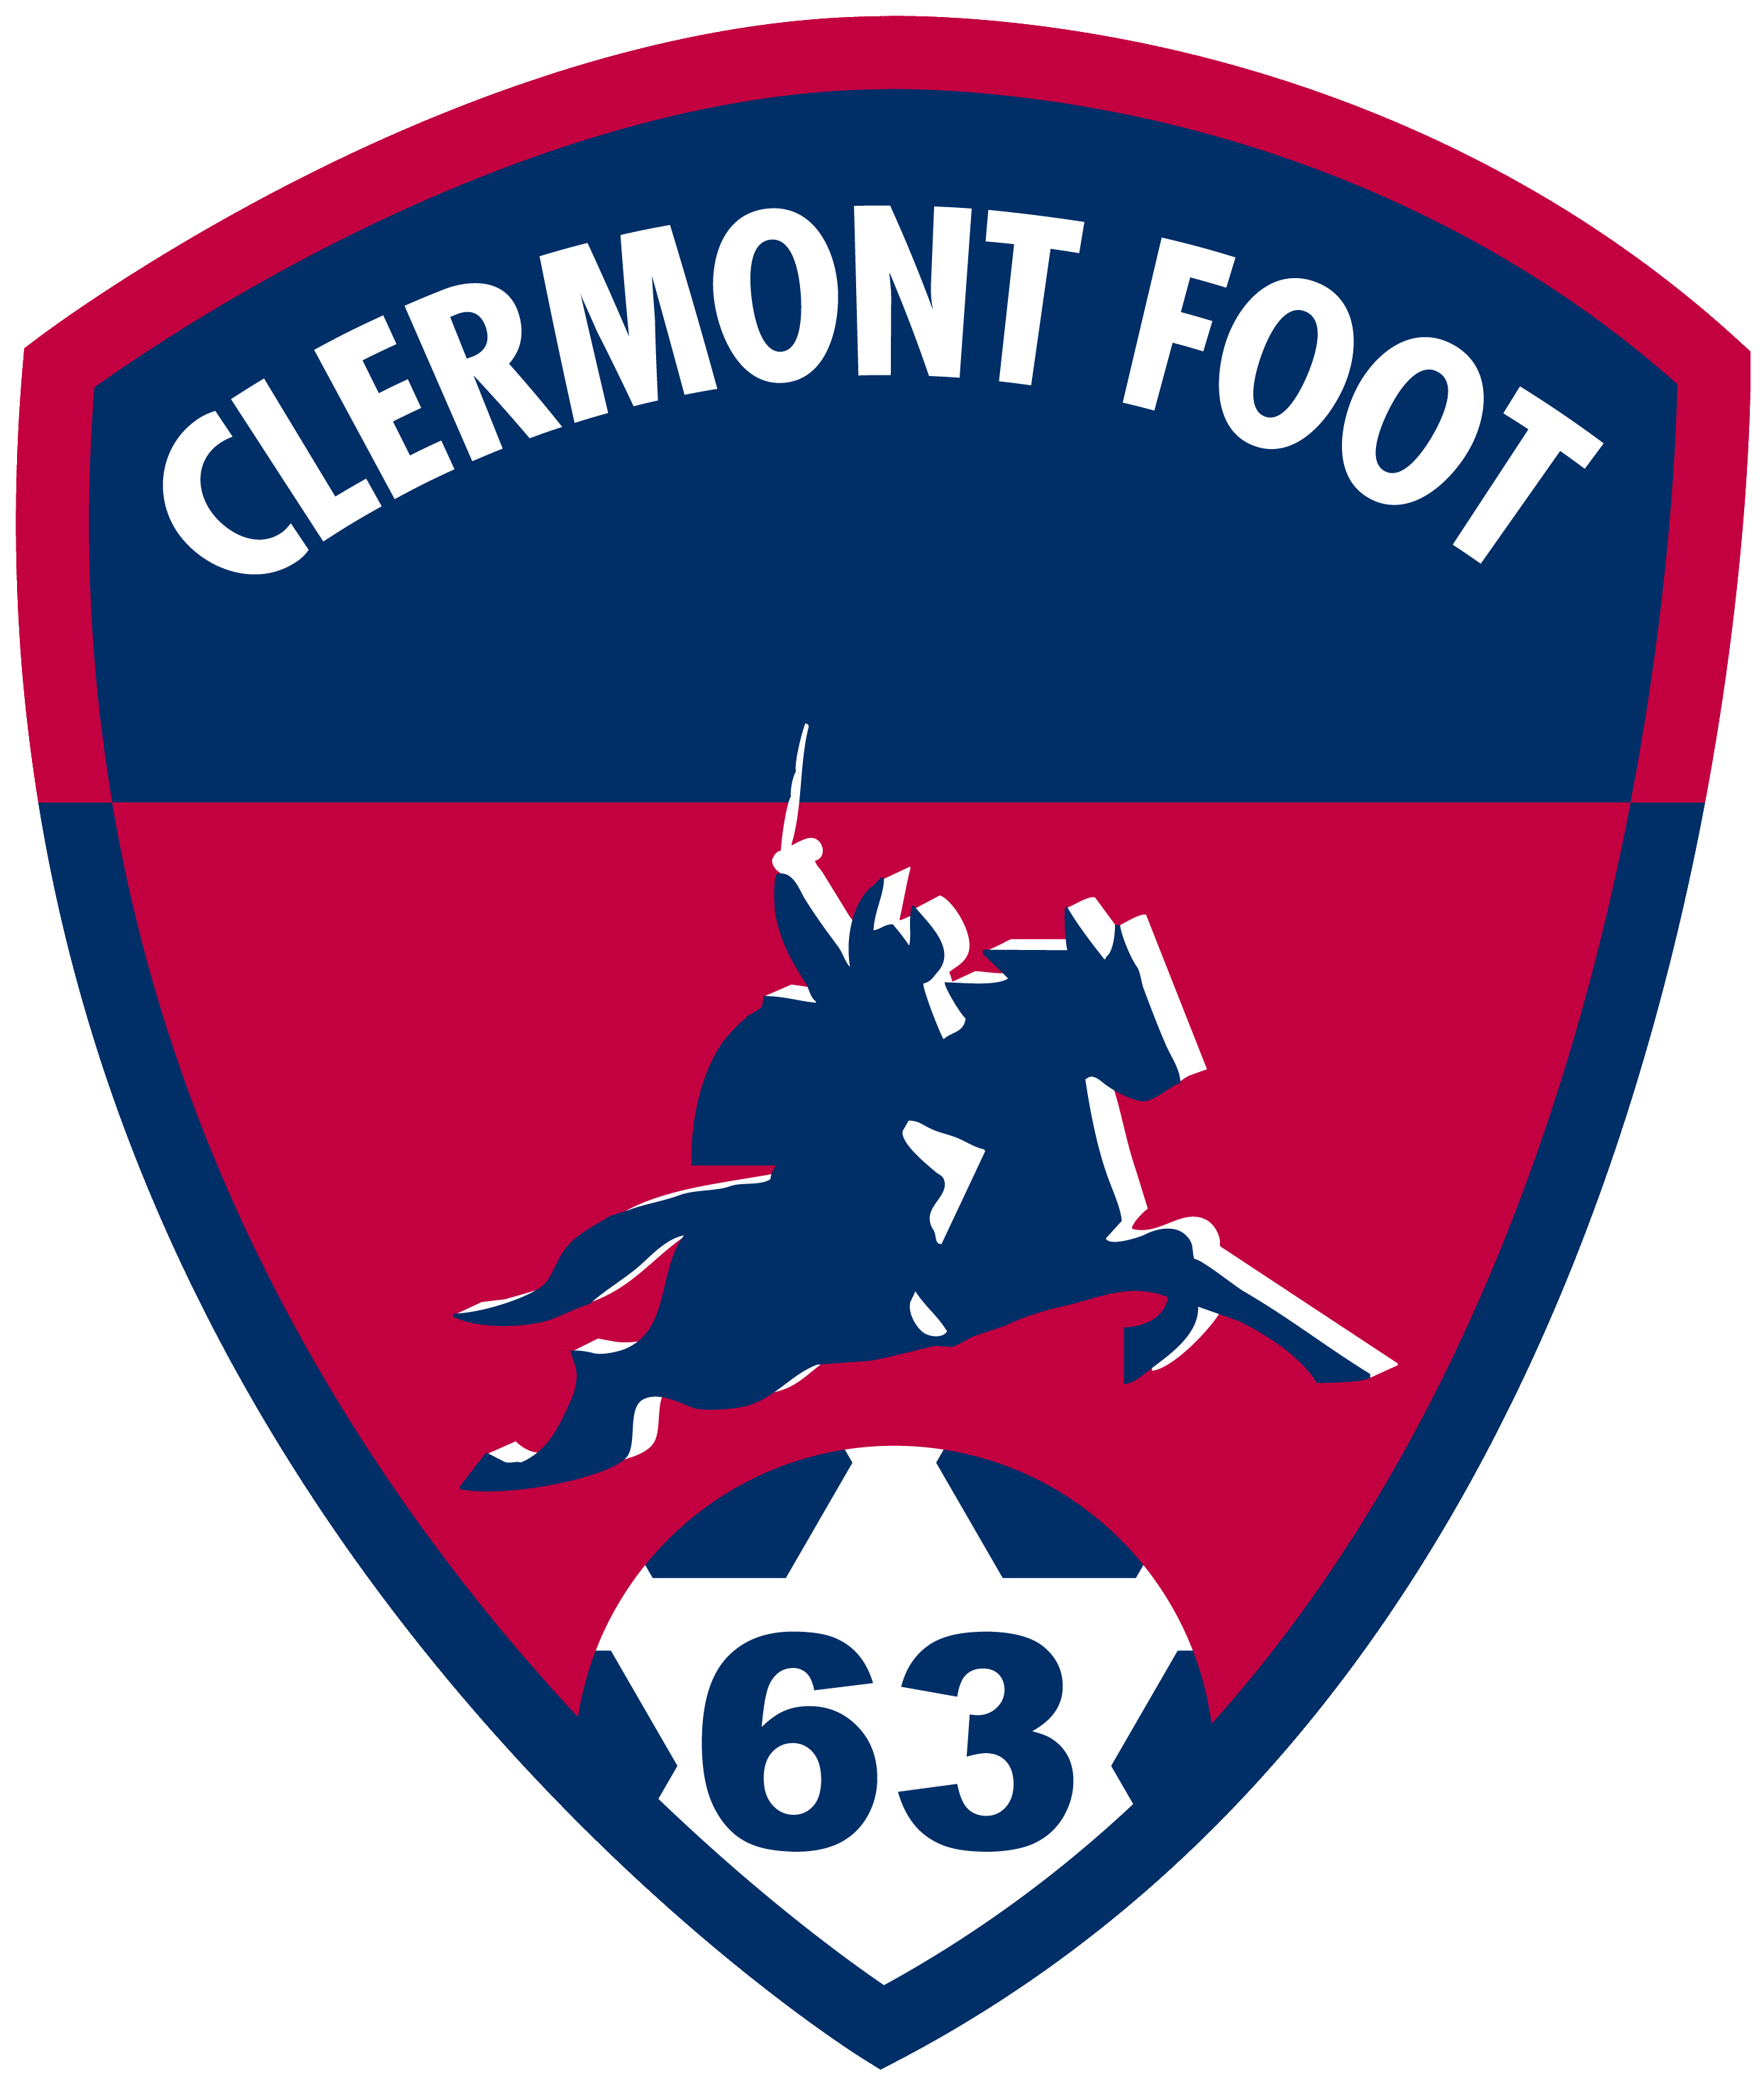 Metz FC vs Clermont Foot 63 Prediction: The bad meets the ugly. 